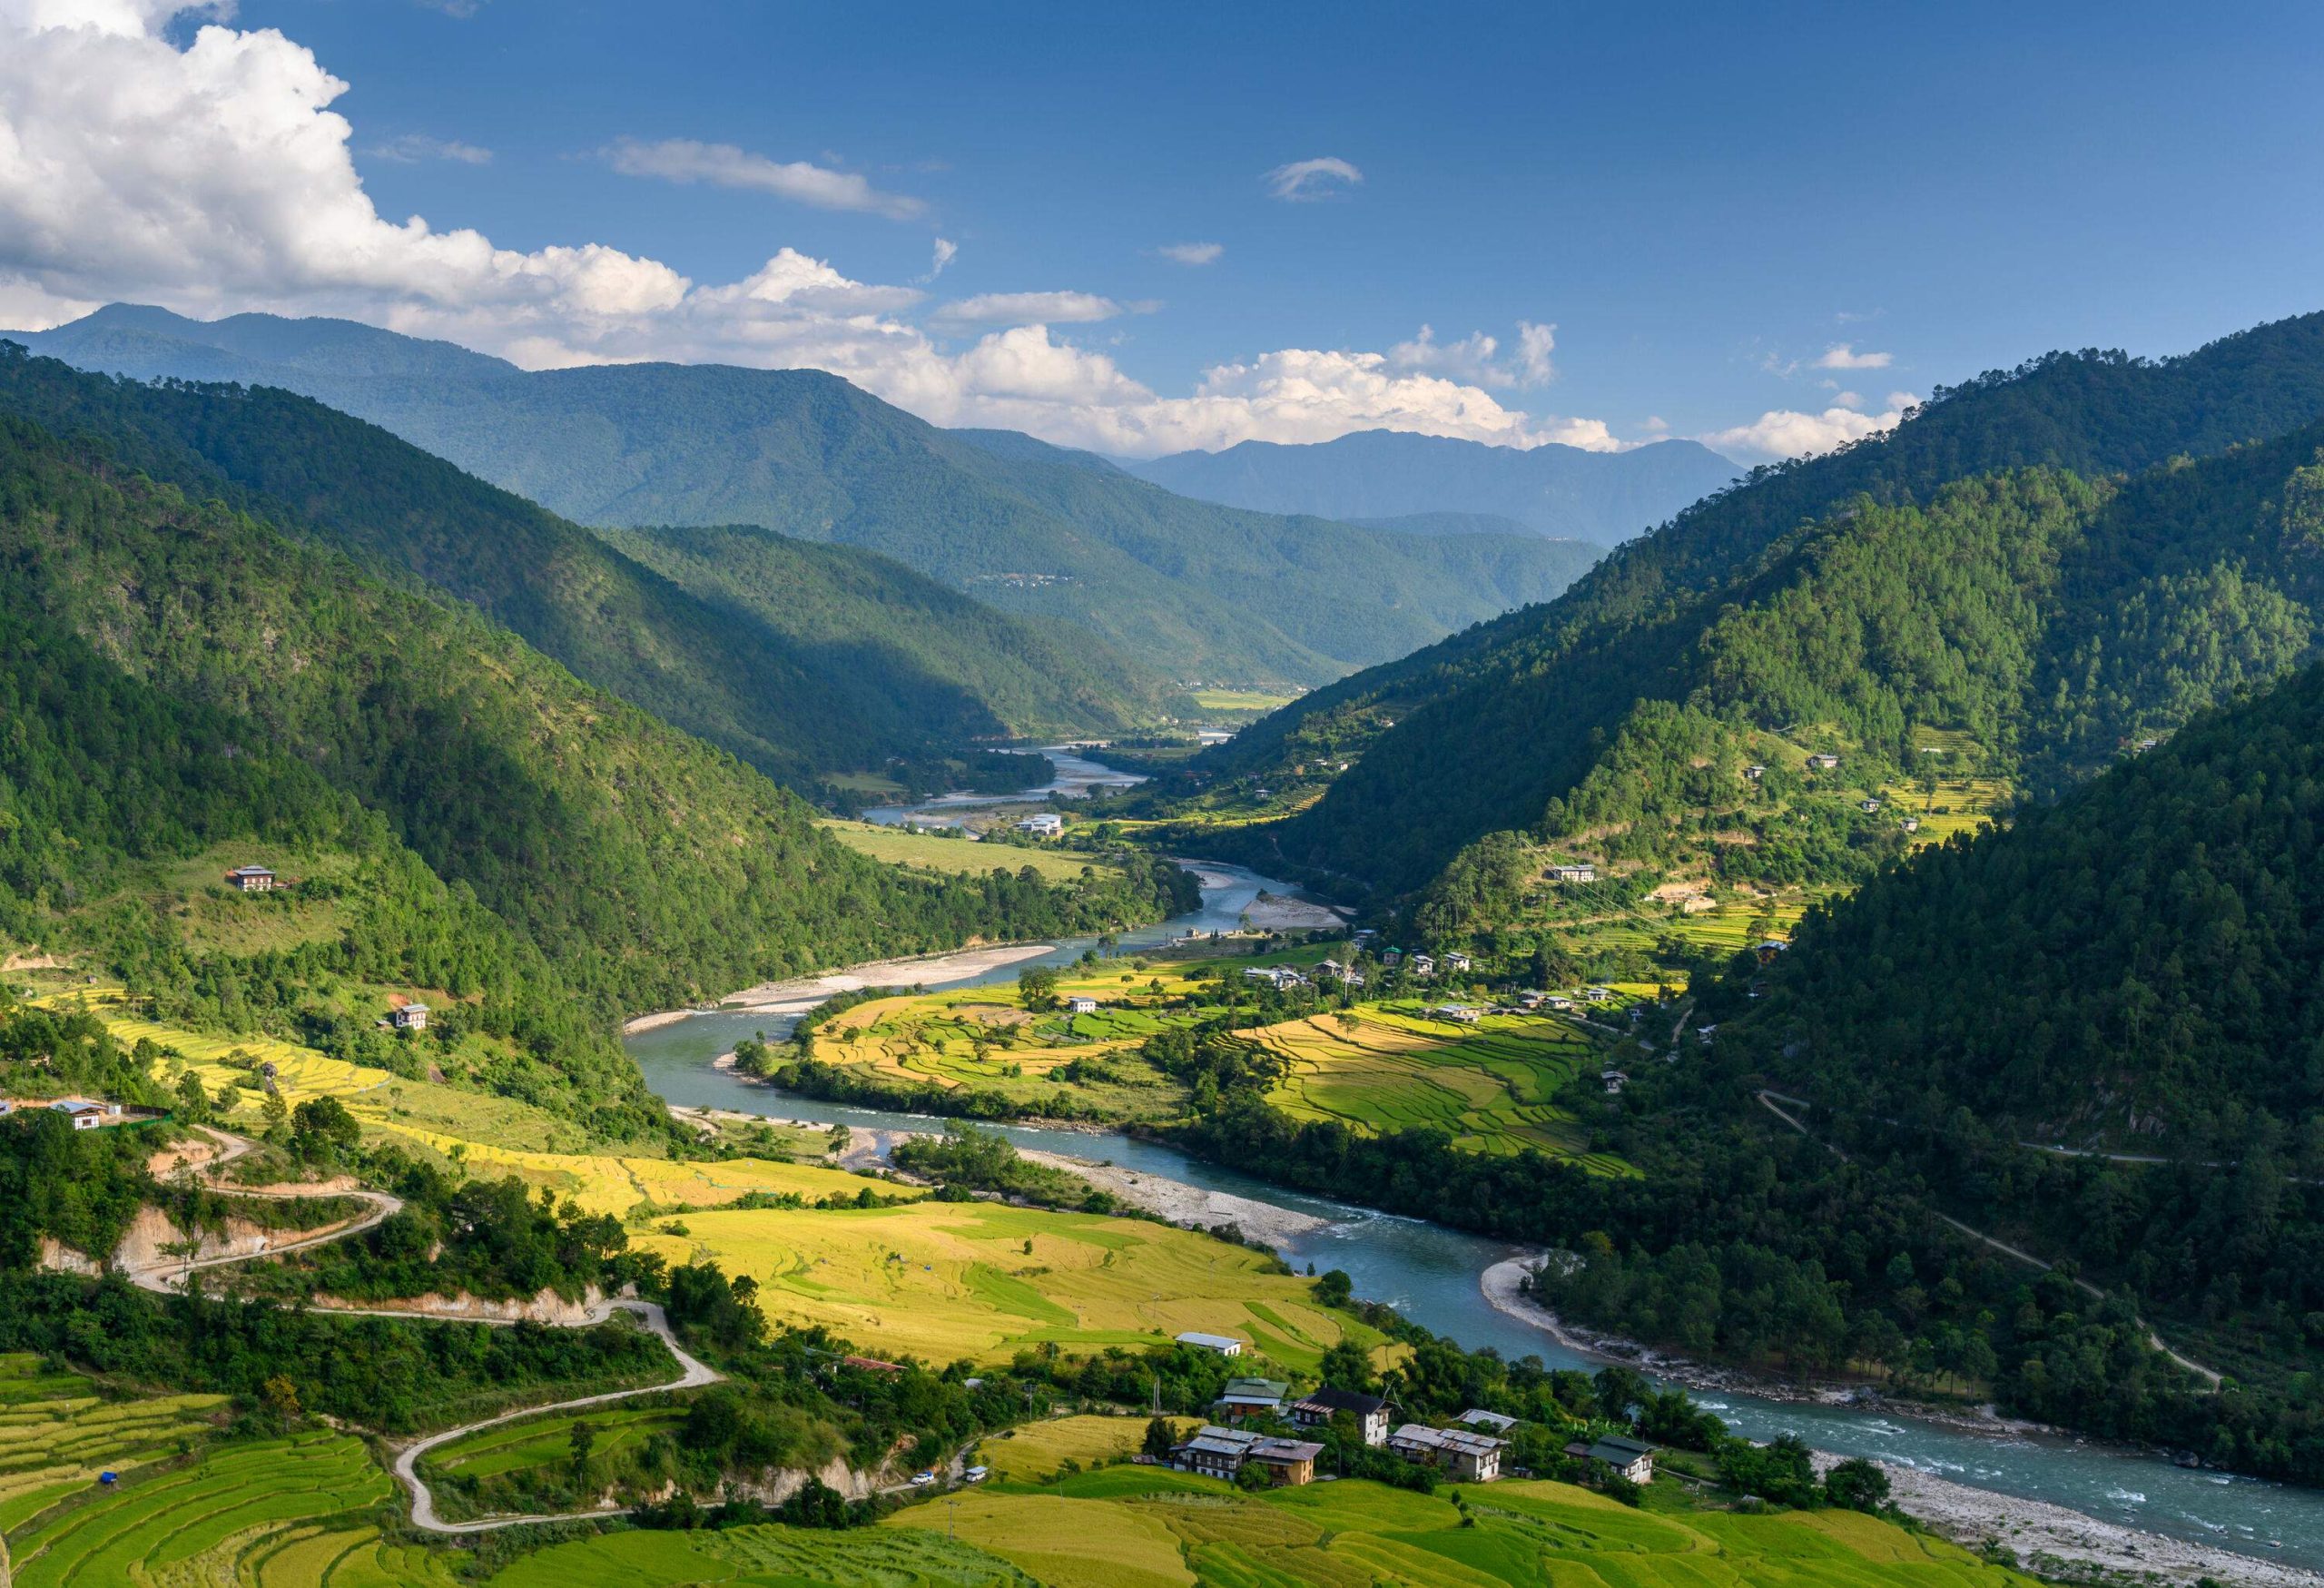 A meandering river gracefully snakes its way between densely wooded mountains, with thriving communities nestled at their feet and terraced farms cascading down the slopes.